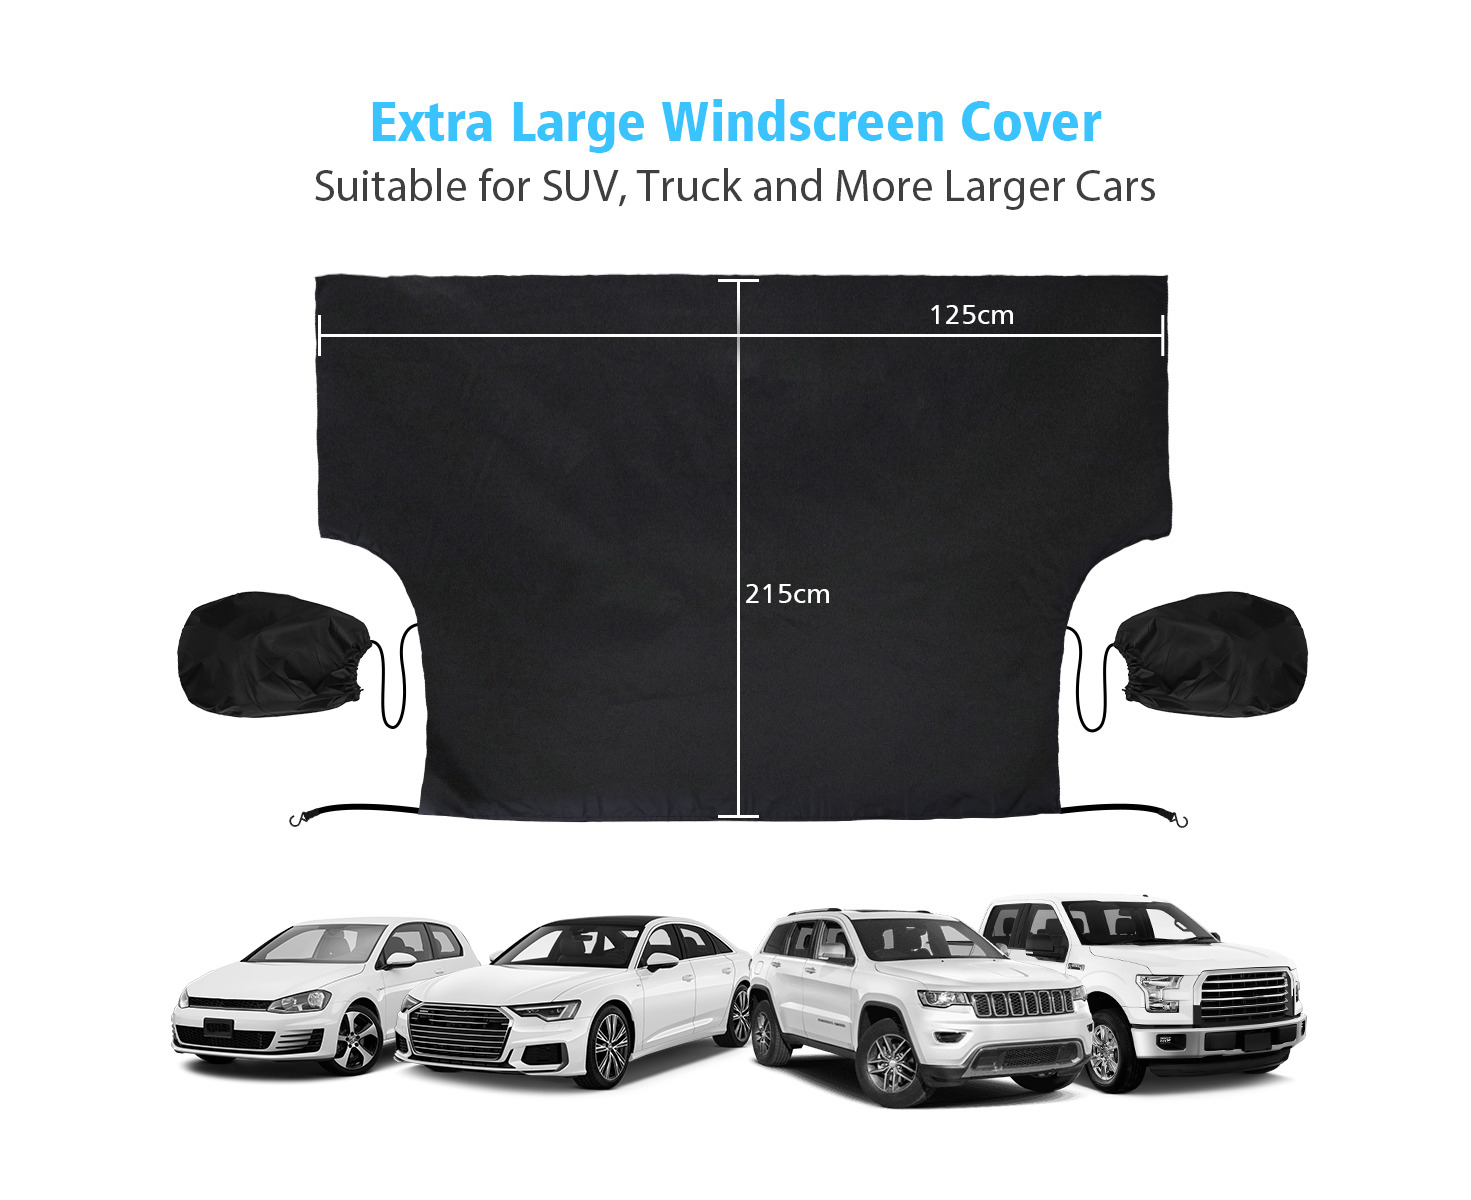 SUV Small:57.87×49.60 Van Car Windscreen Cover Magnetic Windshield Snow Cover with Two Mirror Covers Waterproof Ice/Frost/Dust Protector and Sun Shade in All Weather Fits Most Car Truck 